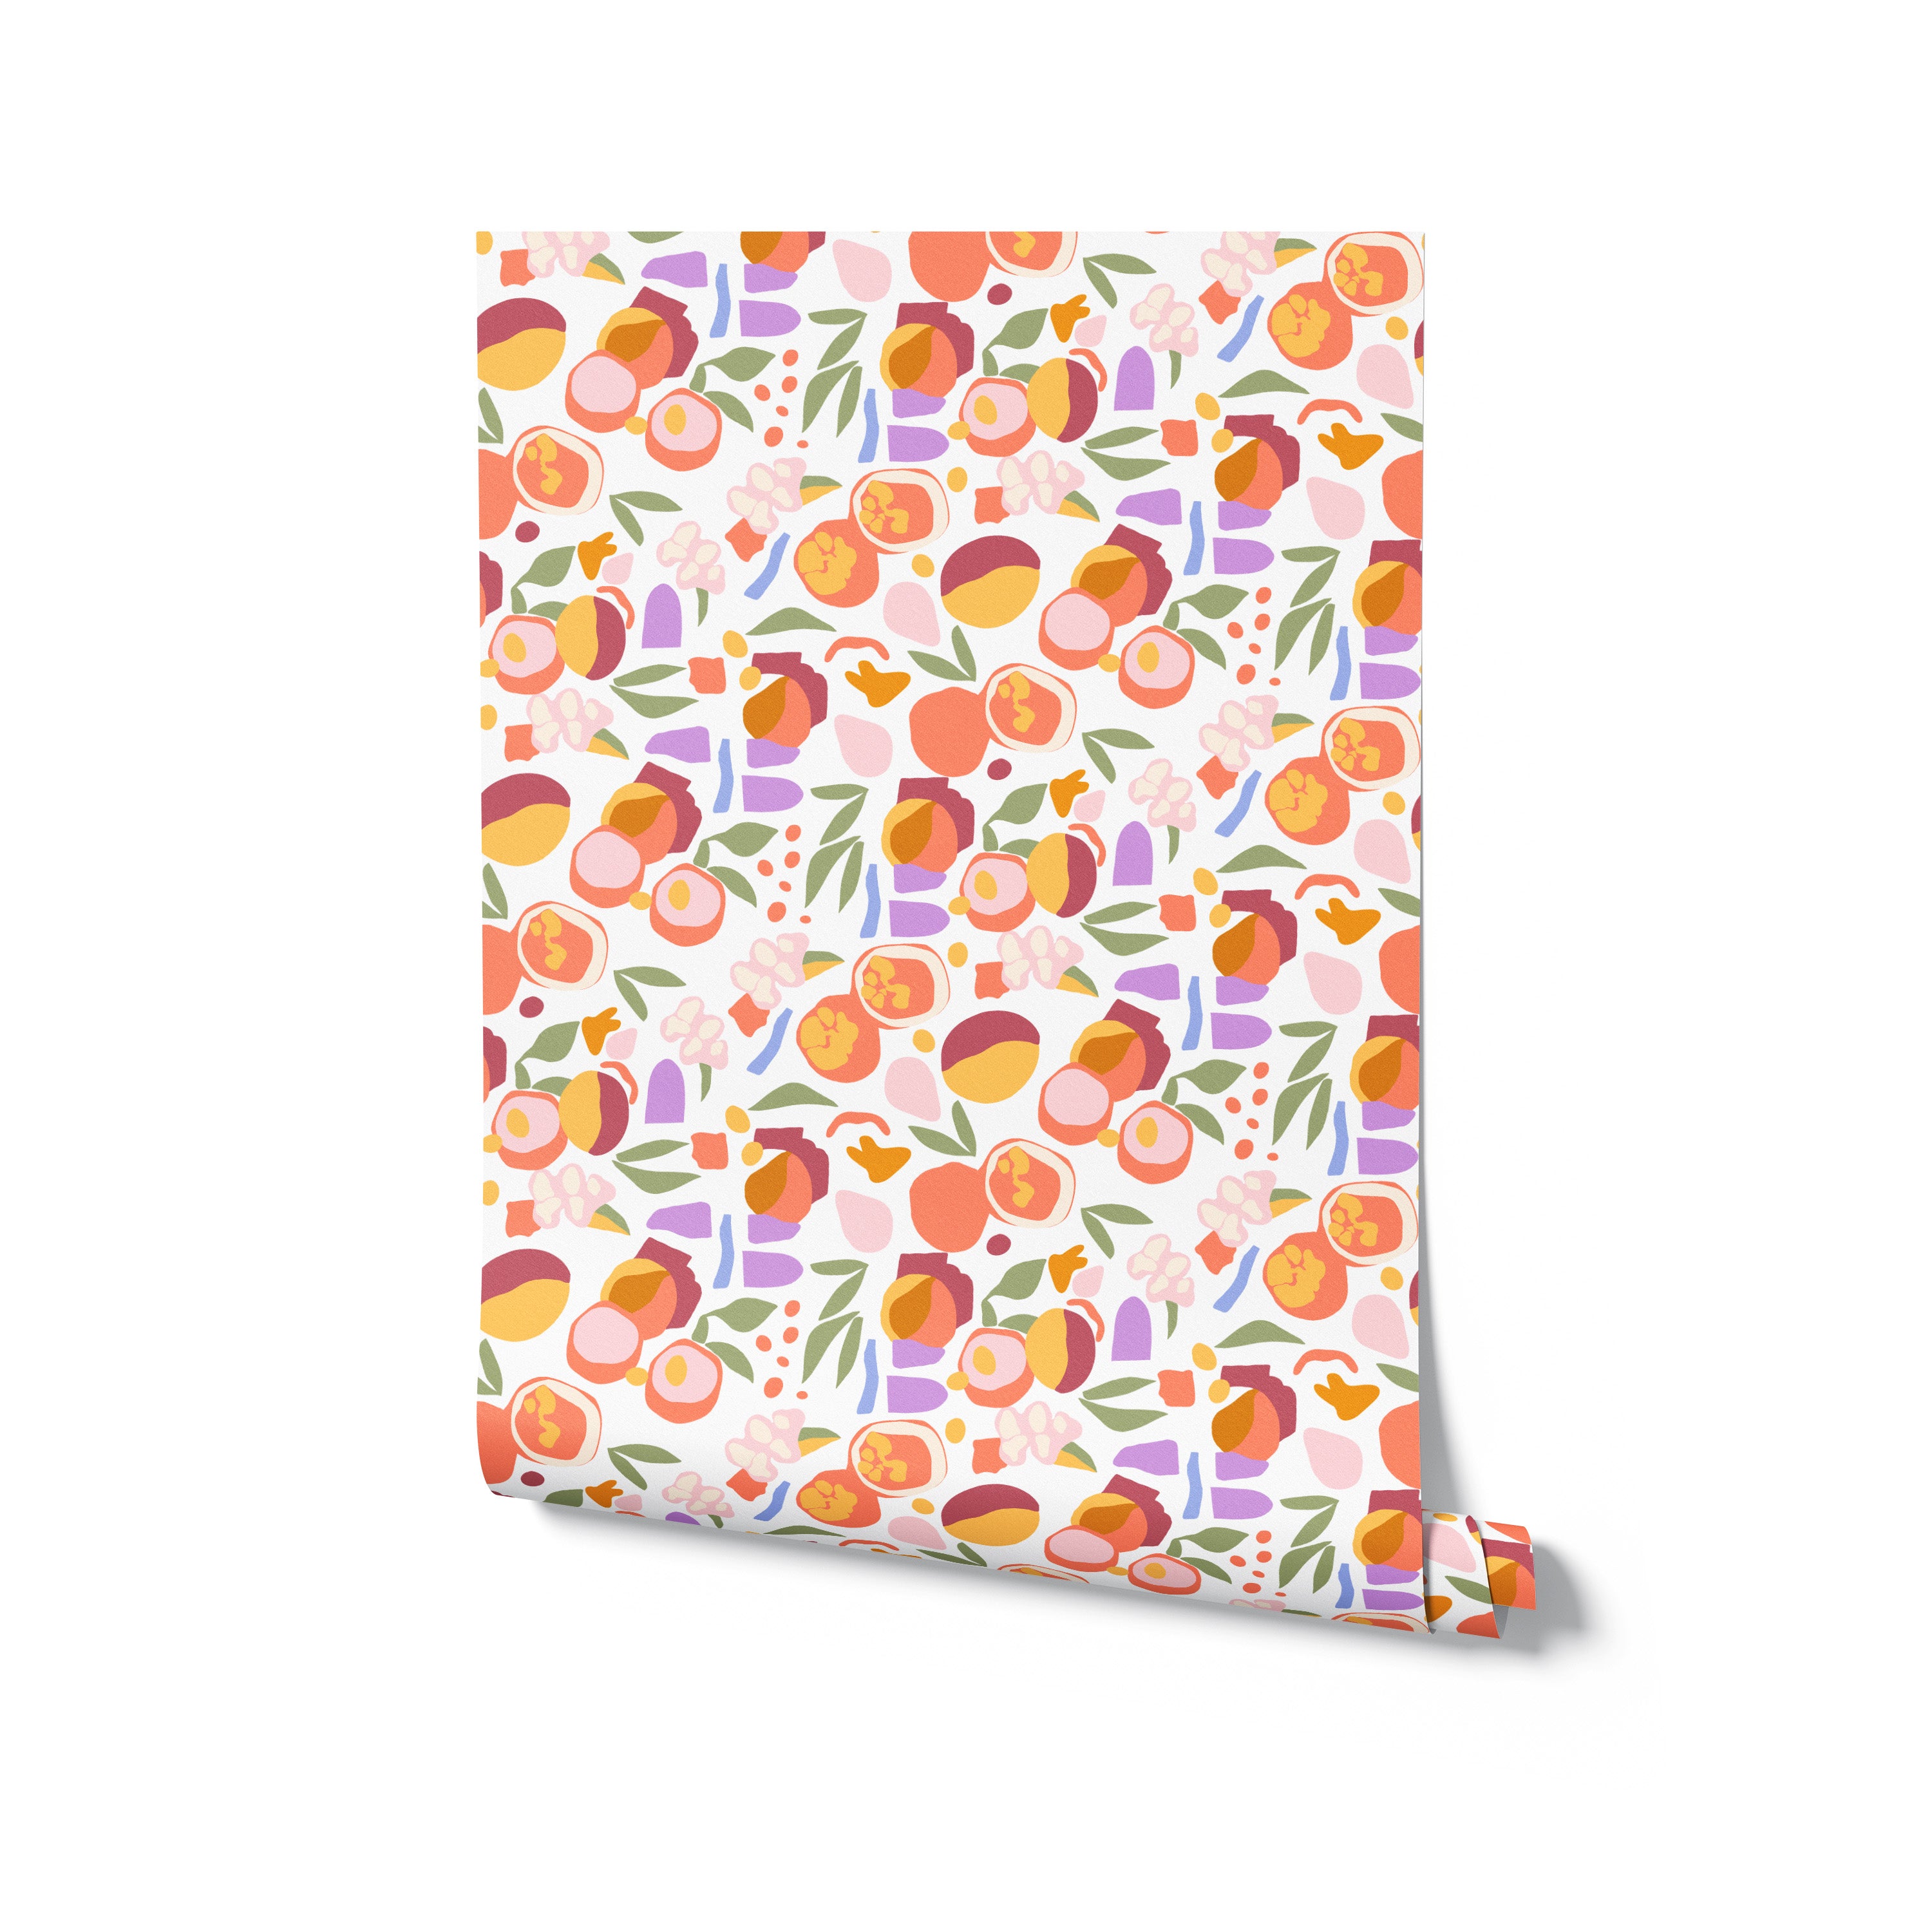 A roll of Funky Fruit Wallpaper unrolled slightly to display the intricate design of assorted fruits and flowers in a lively color palette on a light purple background. This wallpaper offers a fresh and energetic vibe suitable for creative spaces.